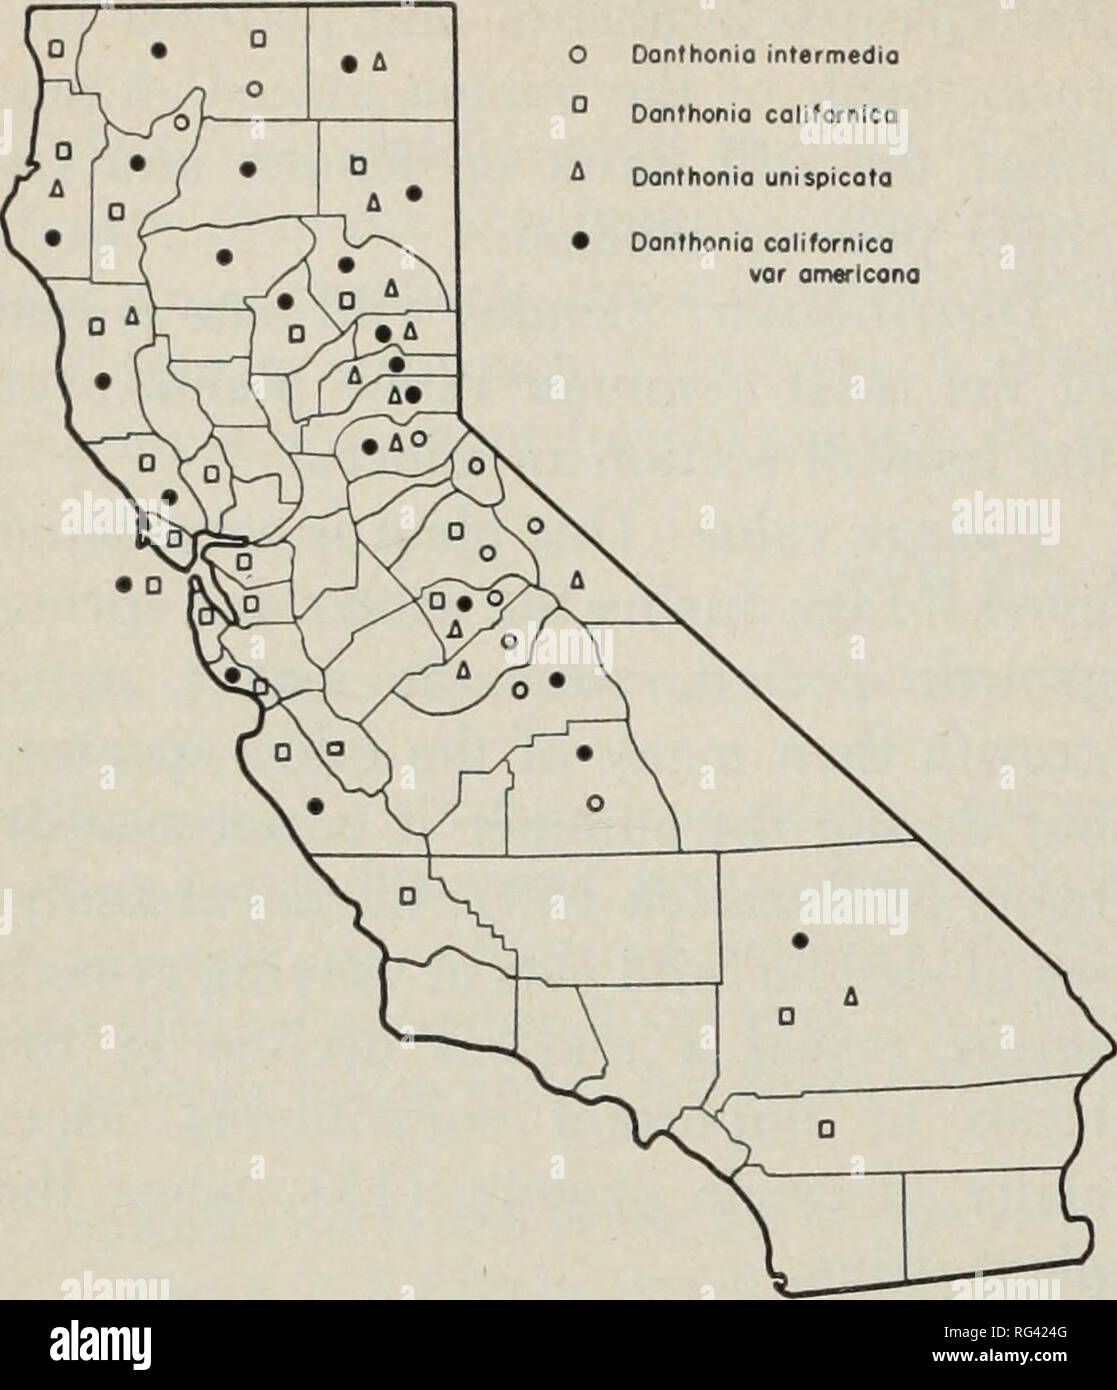 . California grasslands and range forage grasses. Grasses; Forage plants. Donthonio intermedia Donthonia colifornica Donthonio unispicata Donthonio californieo. Fig. 65. Distribution of oatgrasses (Danthonia spp.). creased elevation. Seeds are large and need trampling into the ground to assure good germination. Key to Species Spikelet usually solitary or with 1 or 2 reduced spikelets borne below it 4. D. unispicata Spikelets few to several in an open or narrow panicle Awns of teeth and dorsal awn of lemma much longer than the body of the floret 5. D. pilosa Awns of teeth and dorsal awn of lemm Stock Photo